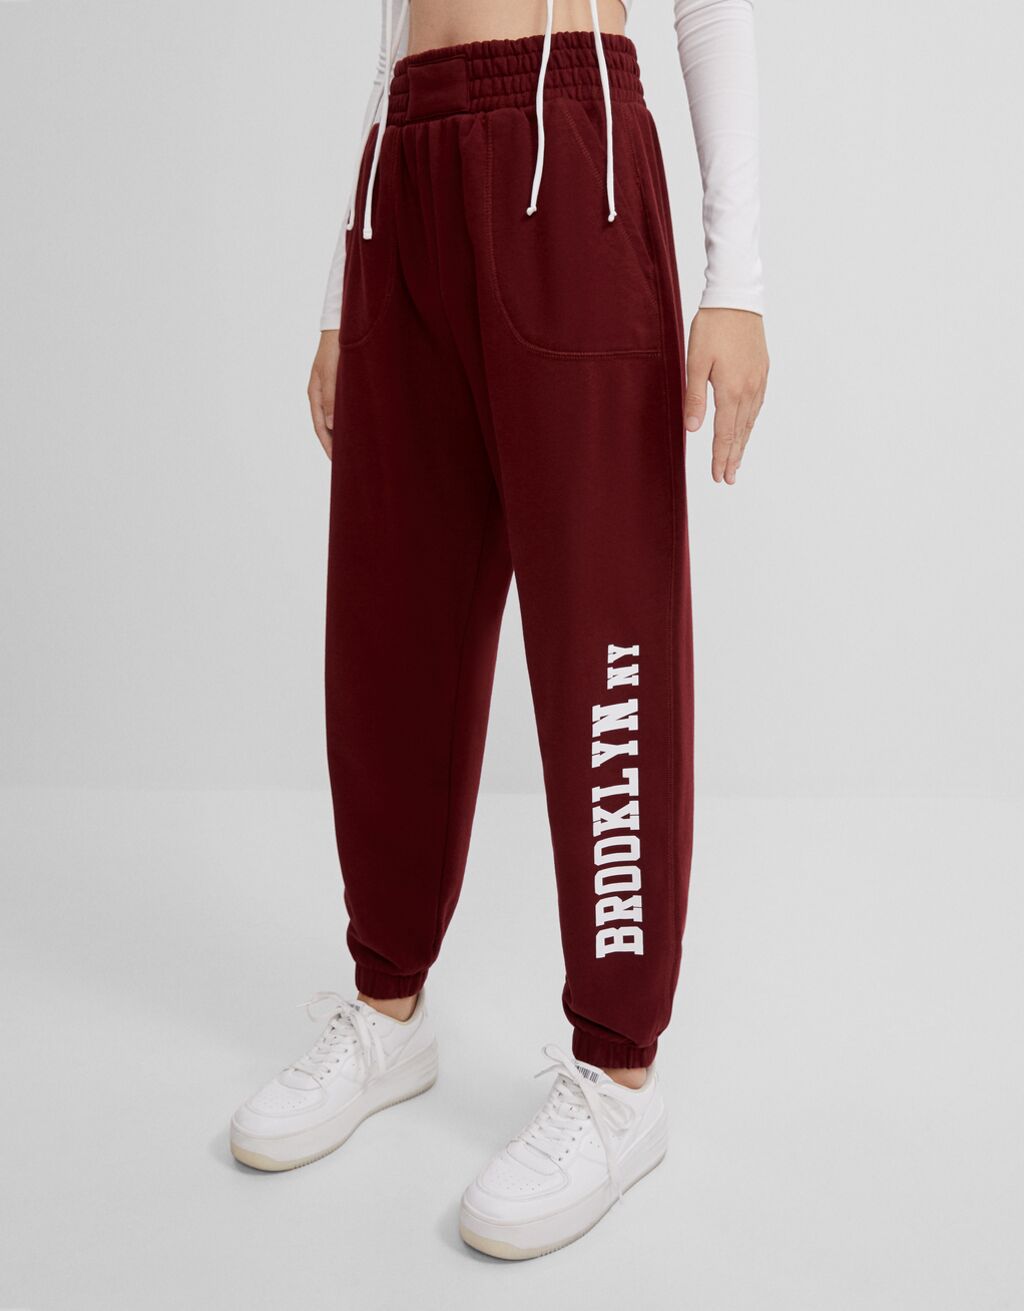 Women S Joggers New Collection Bershka - team 10 red joggers roblox